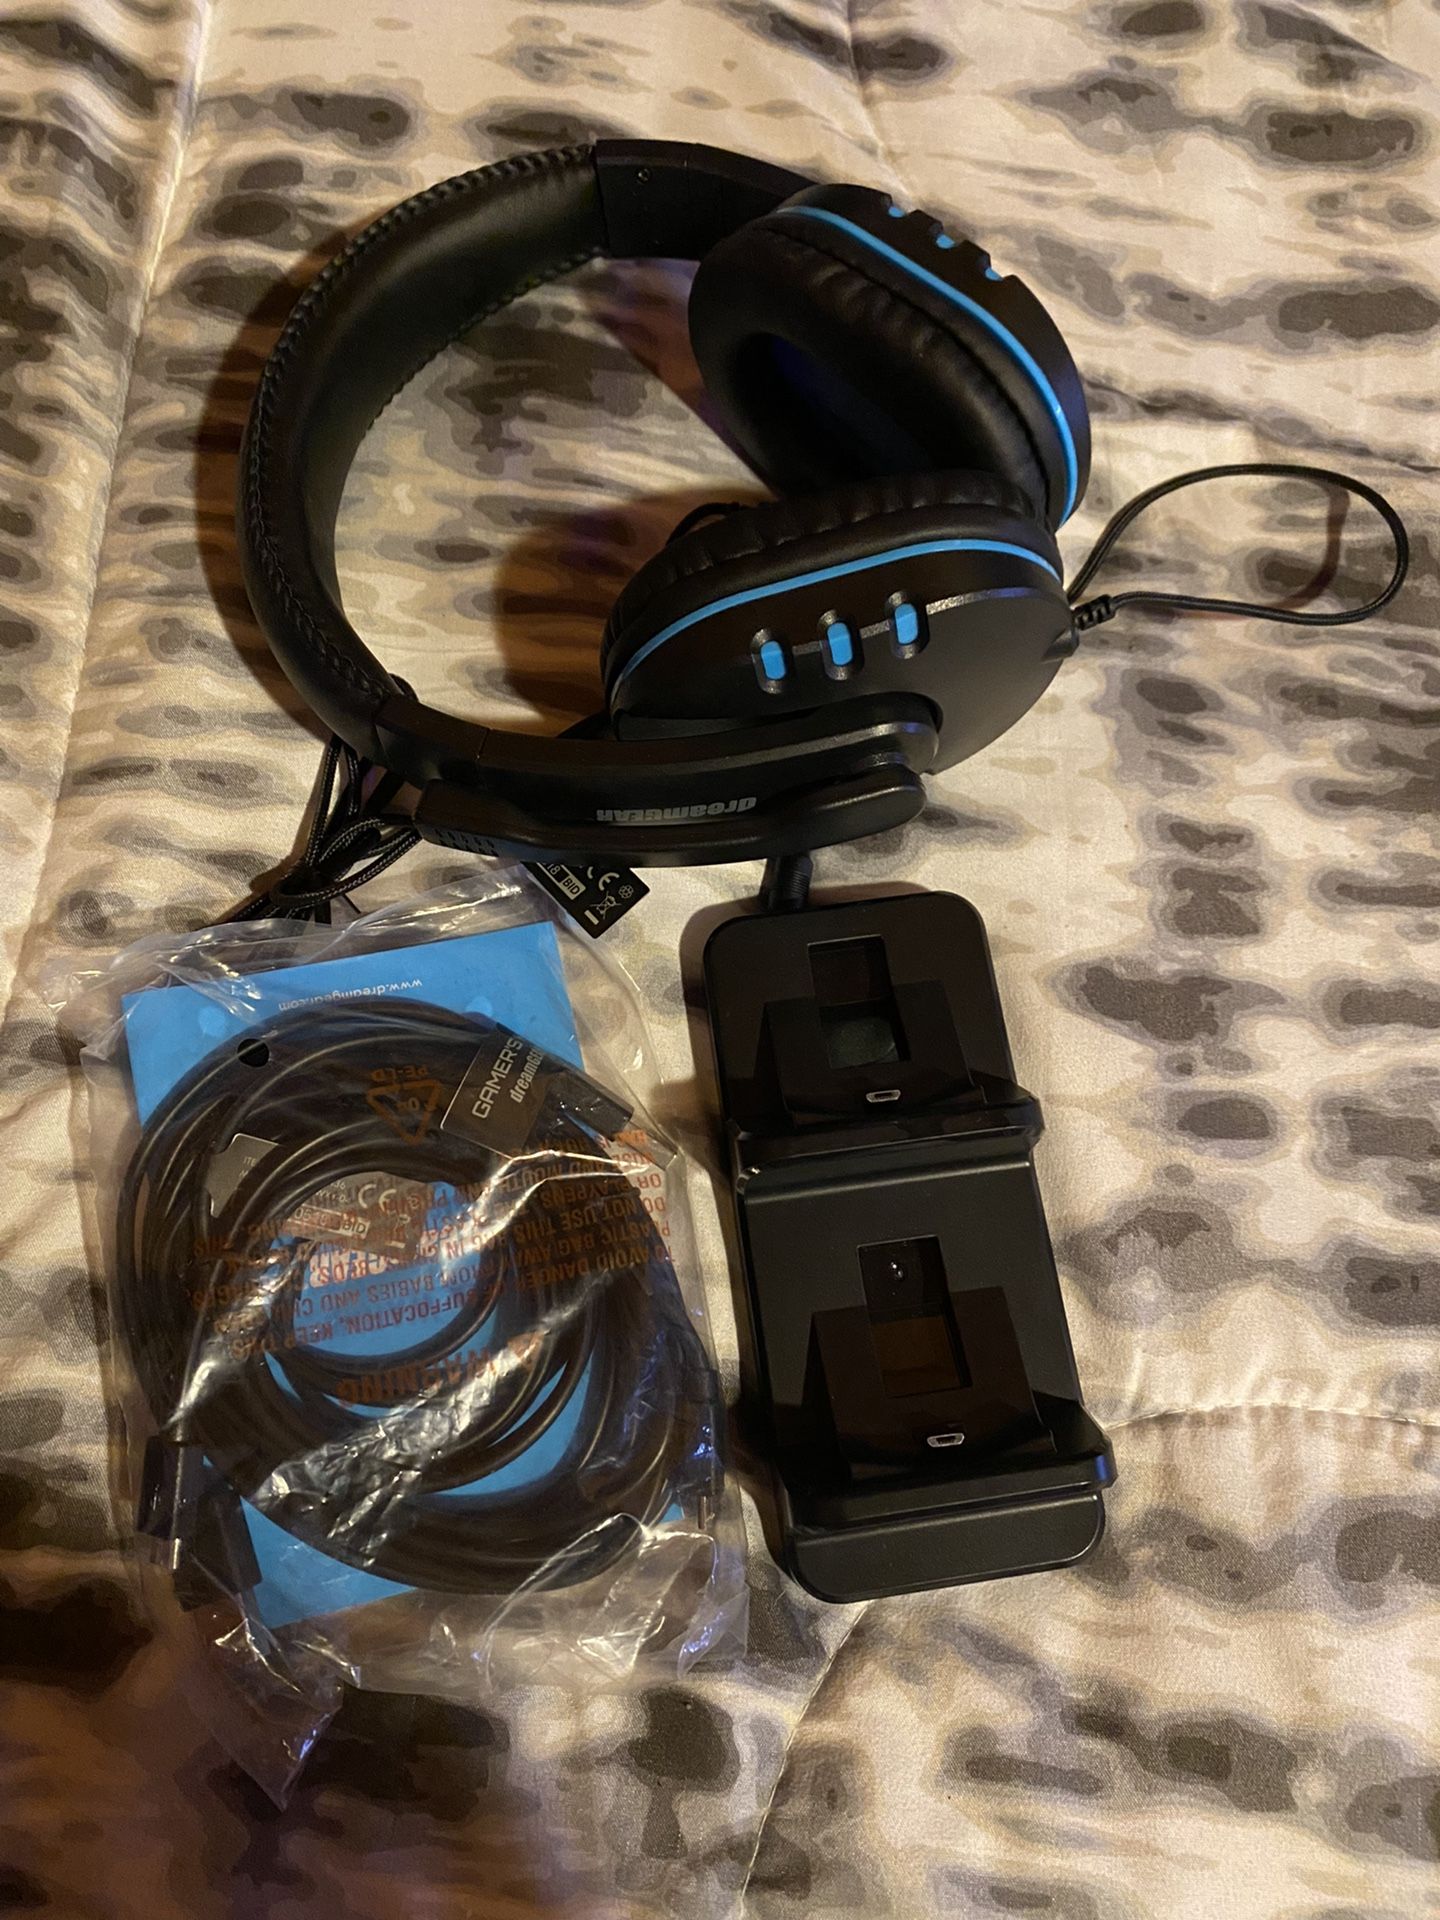 Ps4 Headset And Charger Dock 